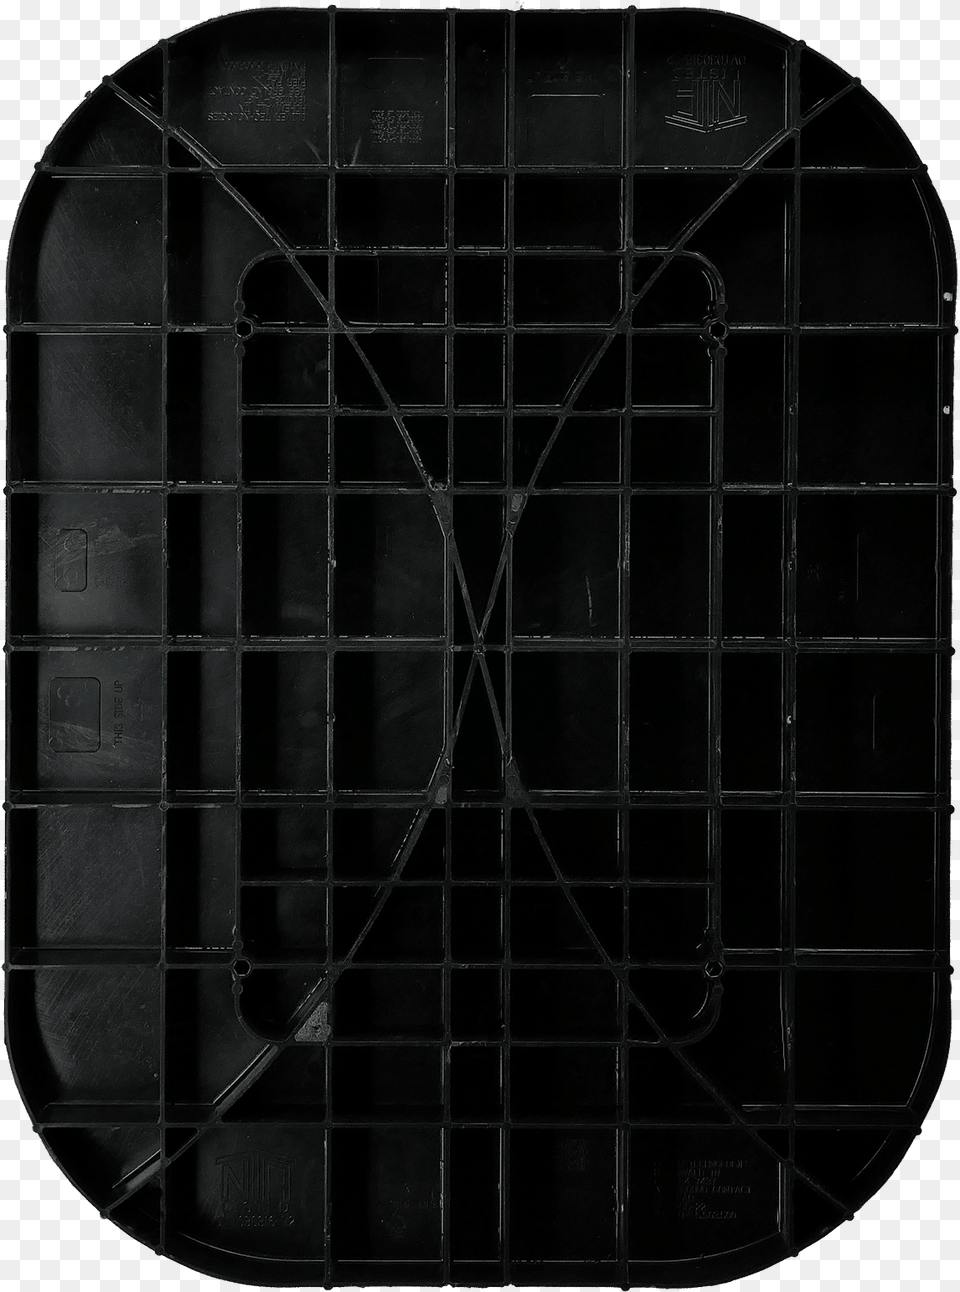 Oval Abs Pier Pad Monochrome, Grille Png